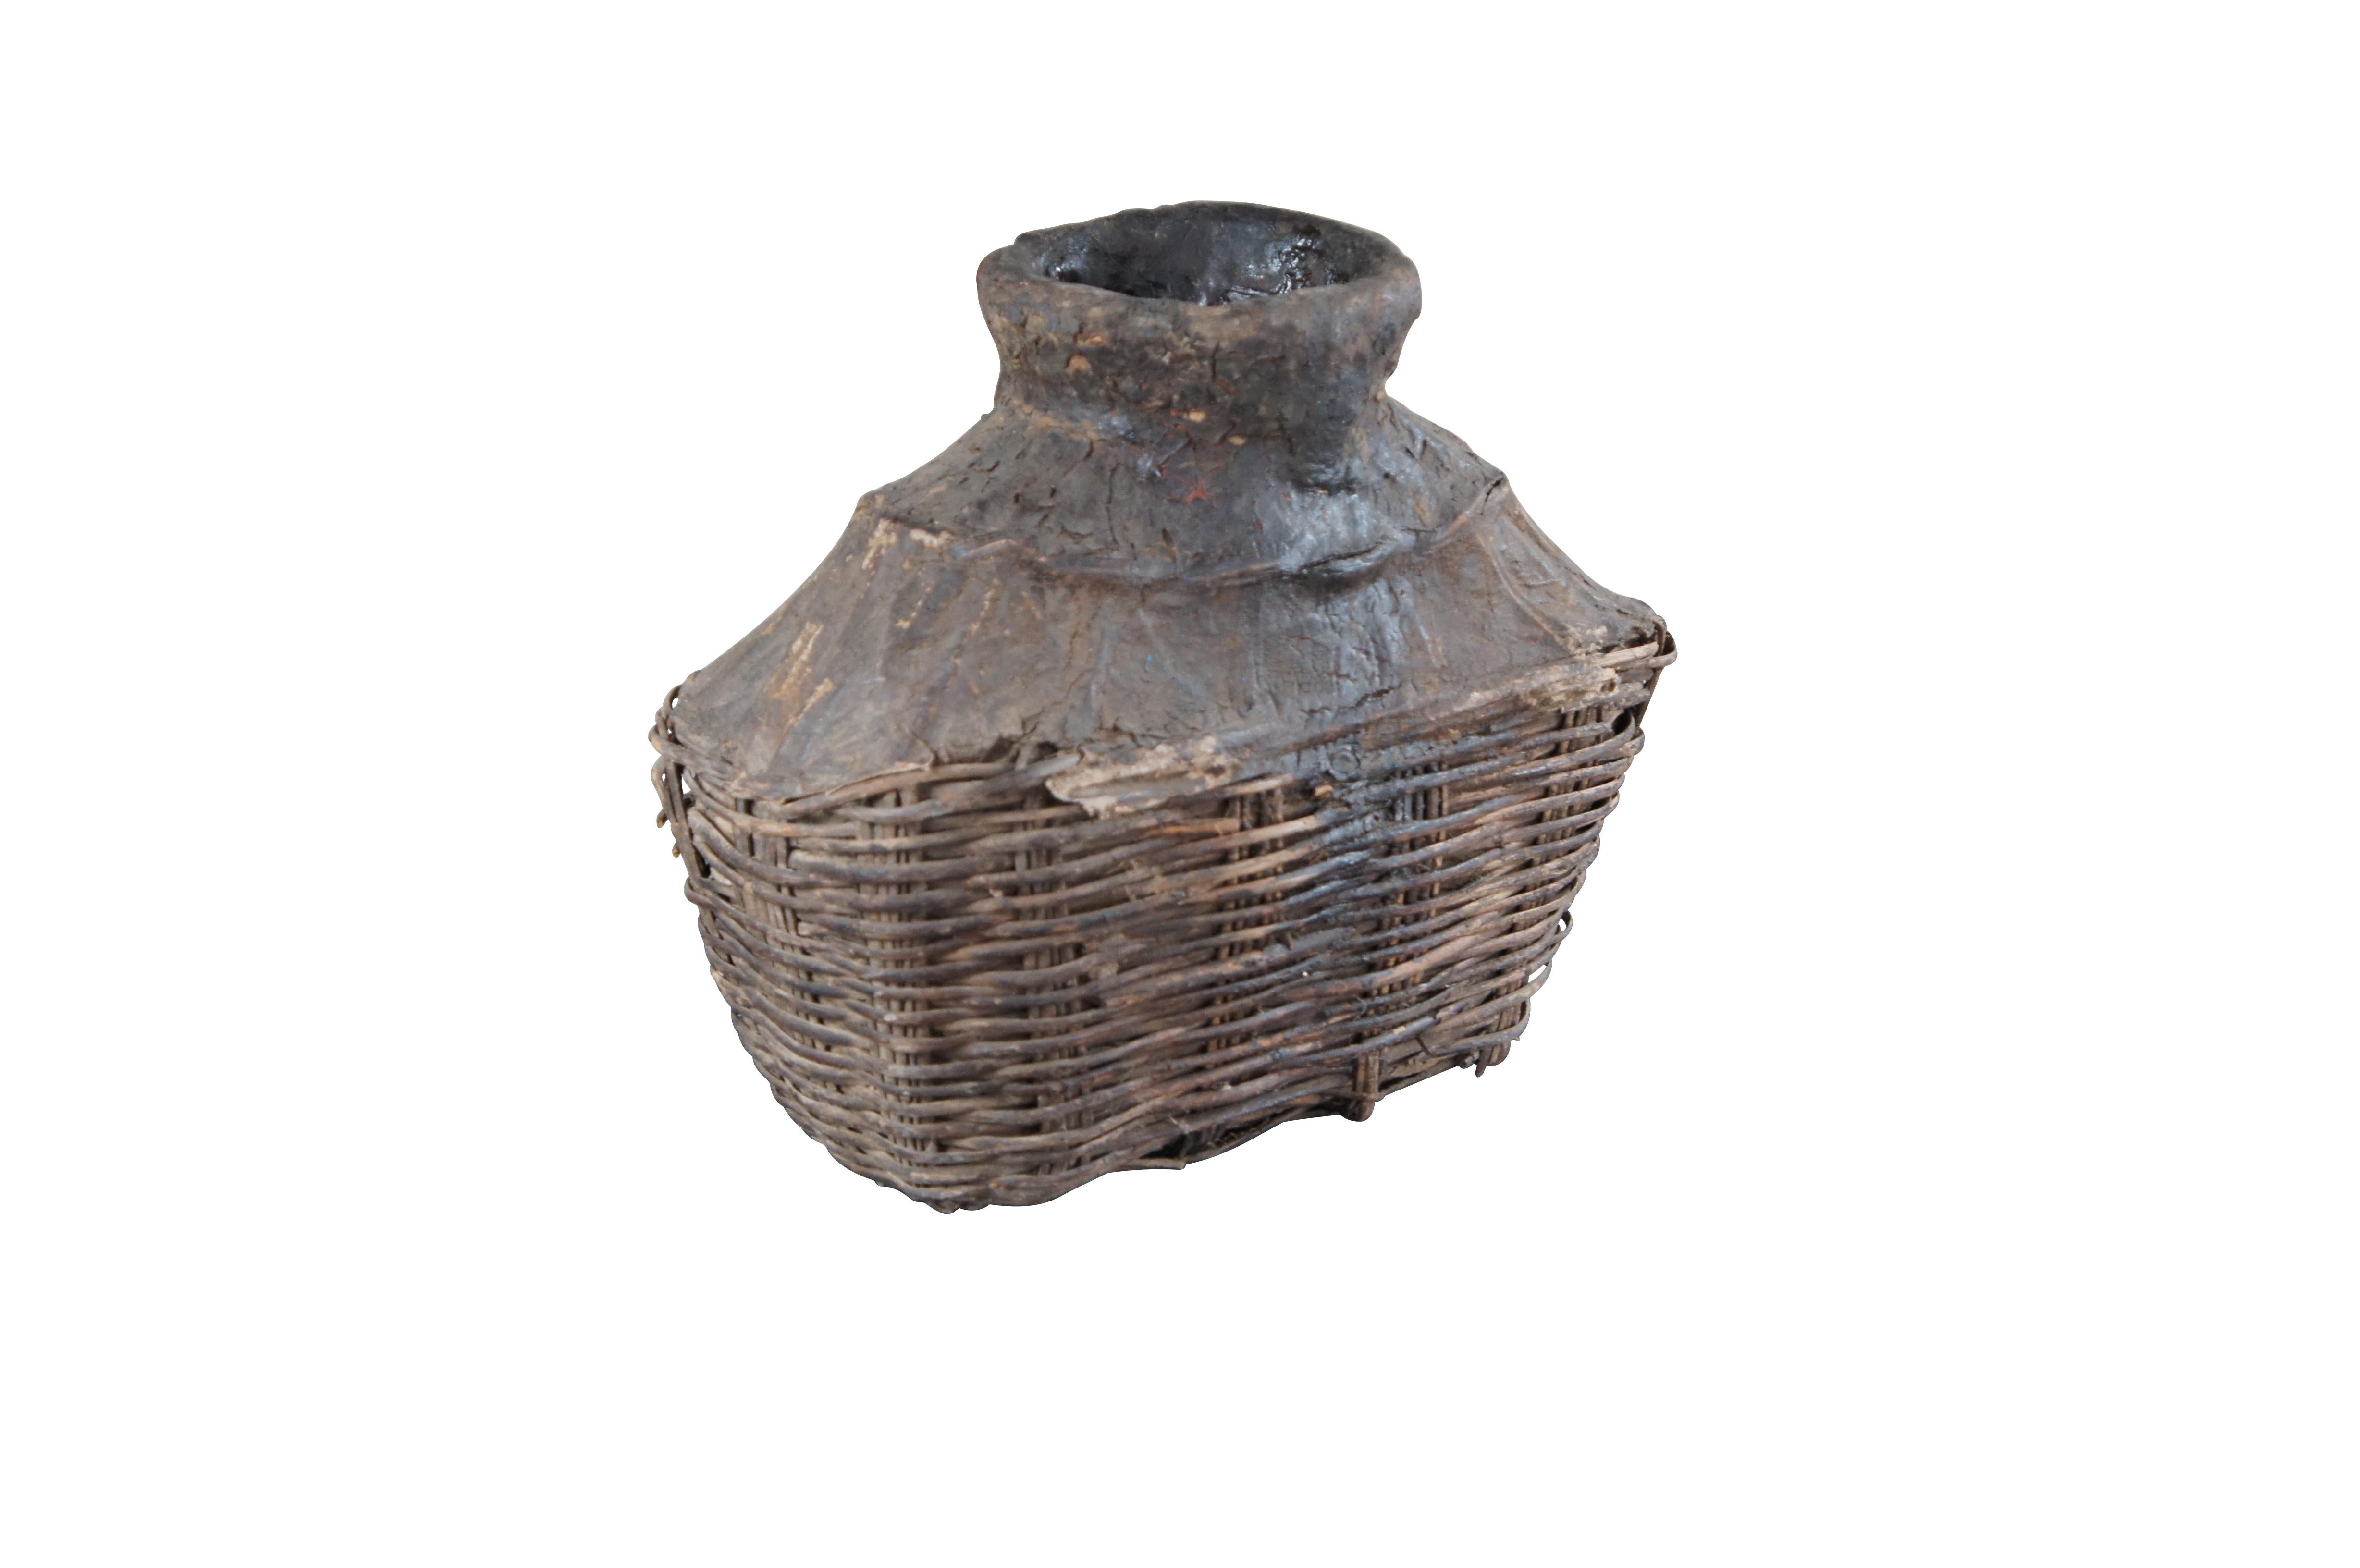 Early 20th Century Chinese Shanxi Willow Oil Container / Food Storage Vessel. Beautifully woven with natural patina from years of use. An unusual yet perfect decorative piece for display in a corner, on a bookcase or in a nook.

Dimensions:
13